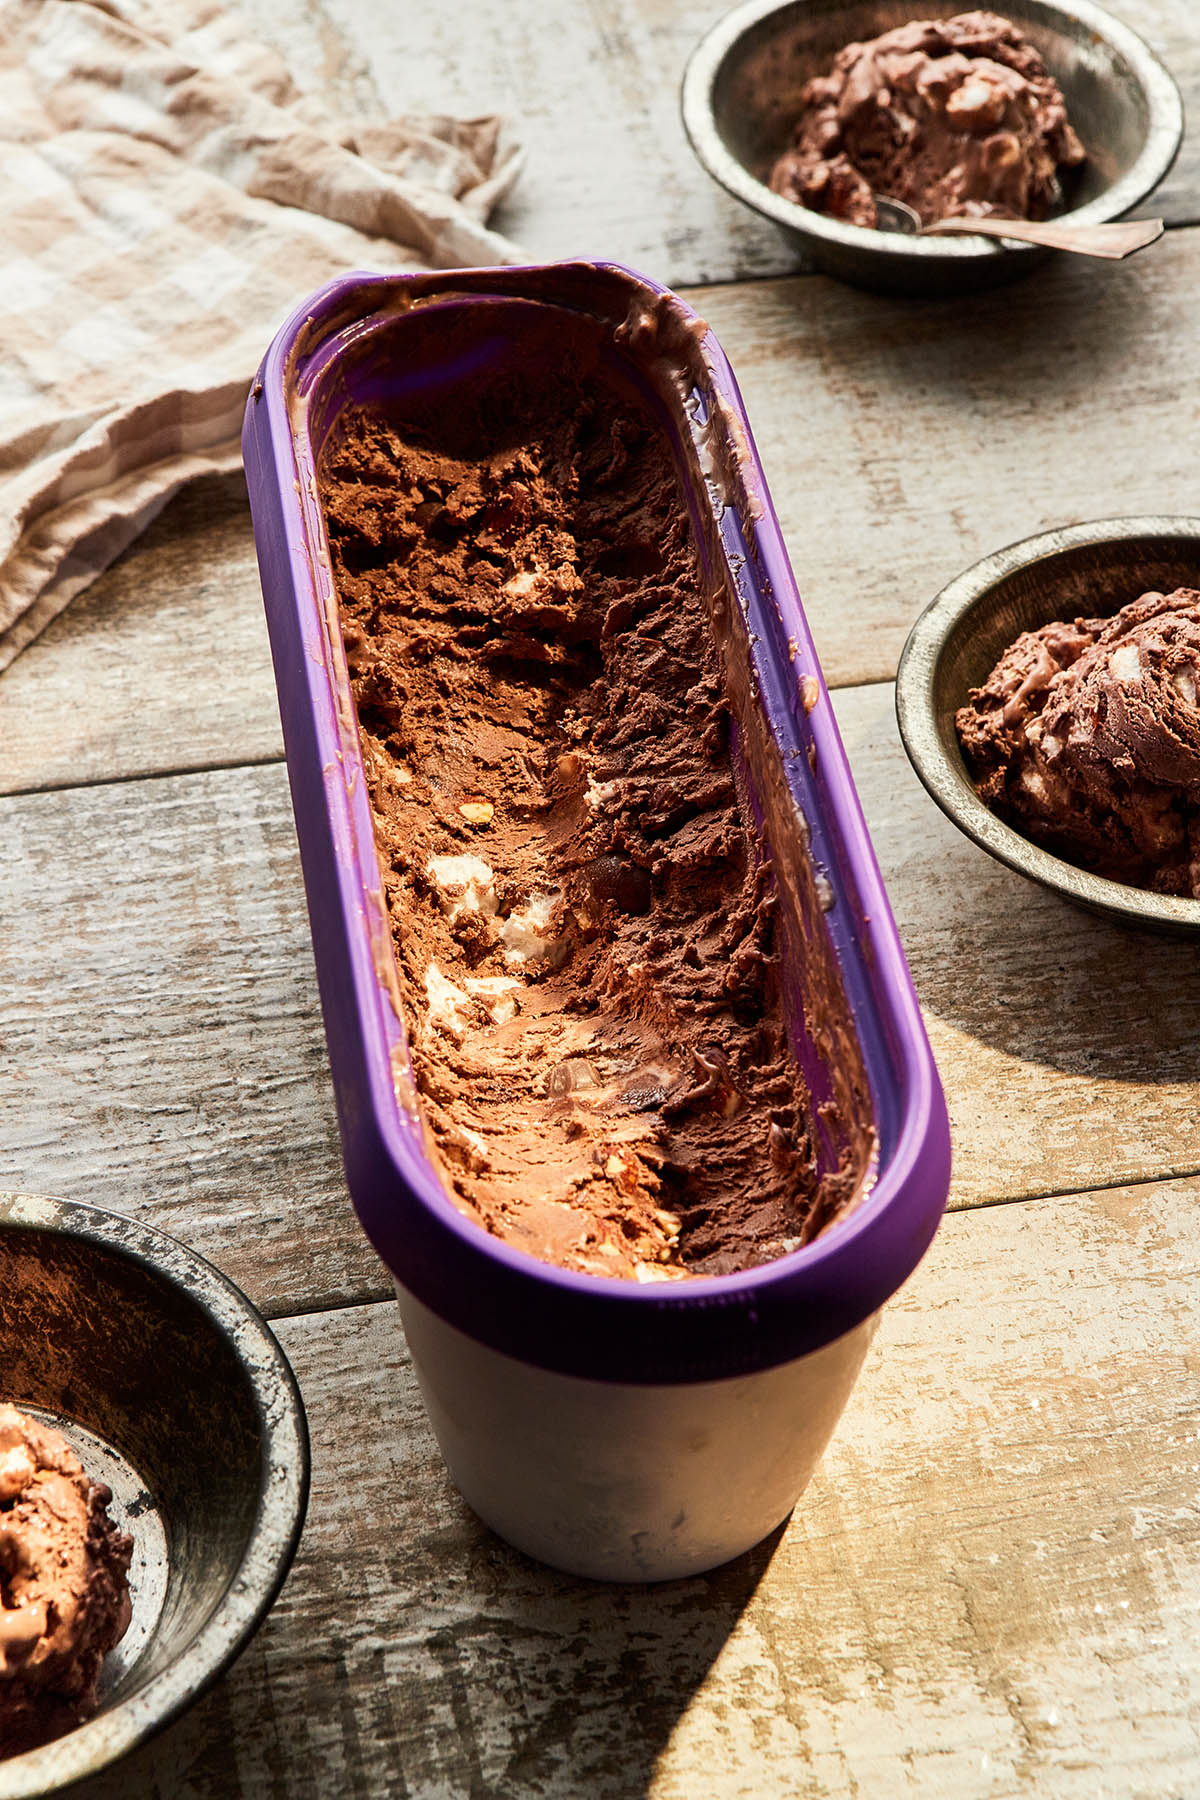 A long oval insulated ice cream tun of rocky road ice cream with half of the ice cream scooped out into dishes.